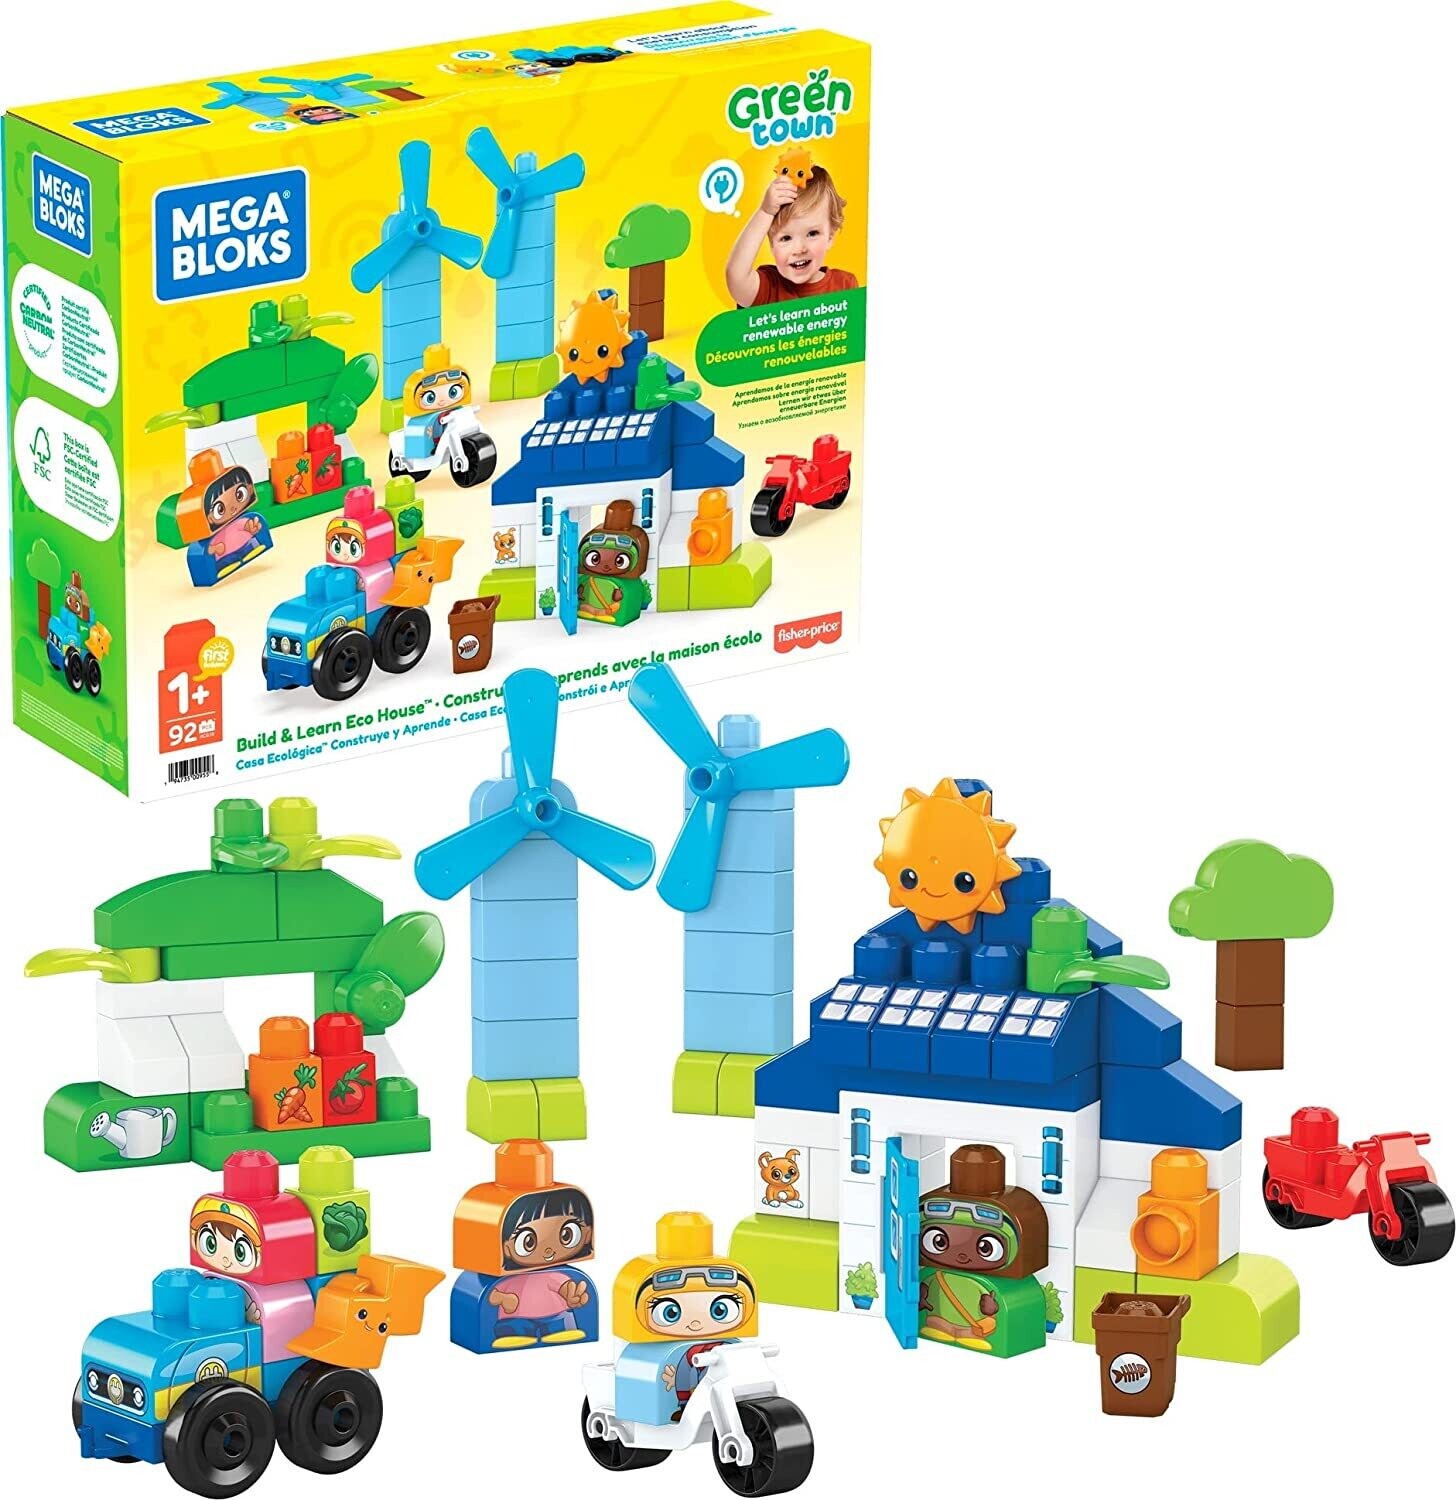 Green Town Build & Learn Eco House - Playset with 89 Building Blocks